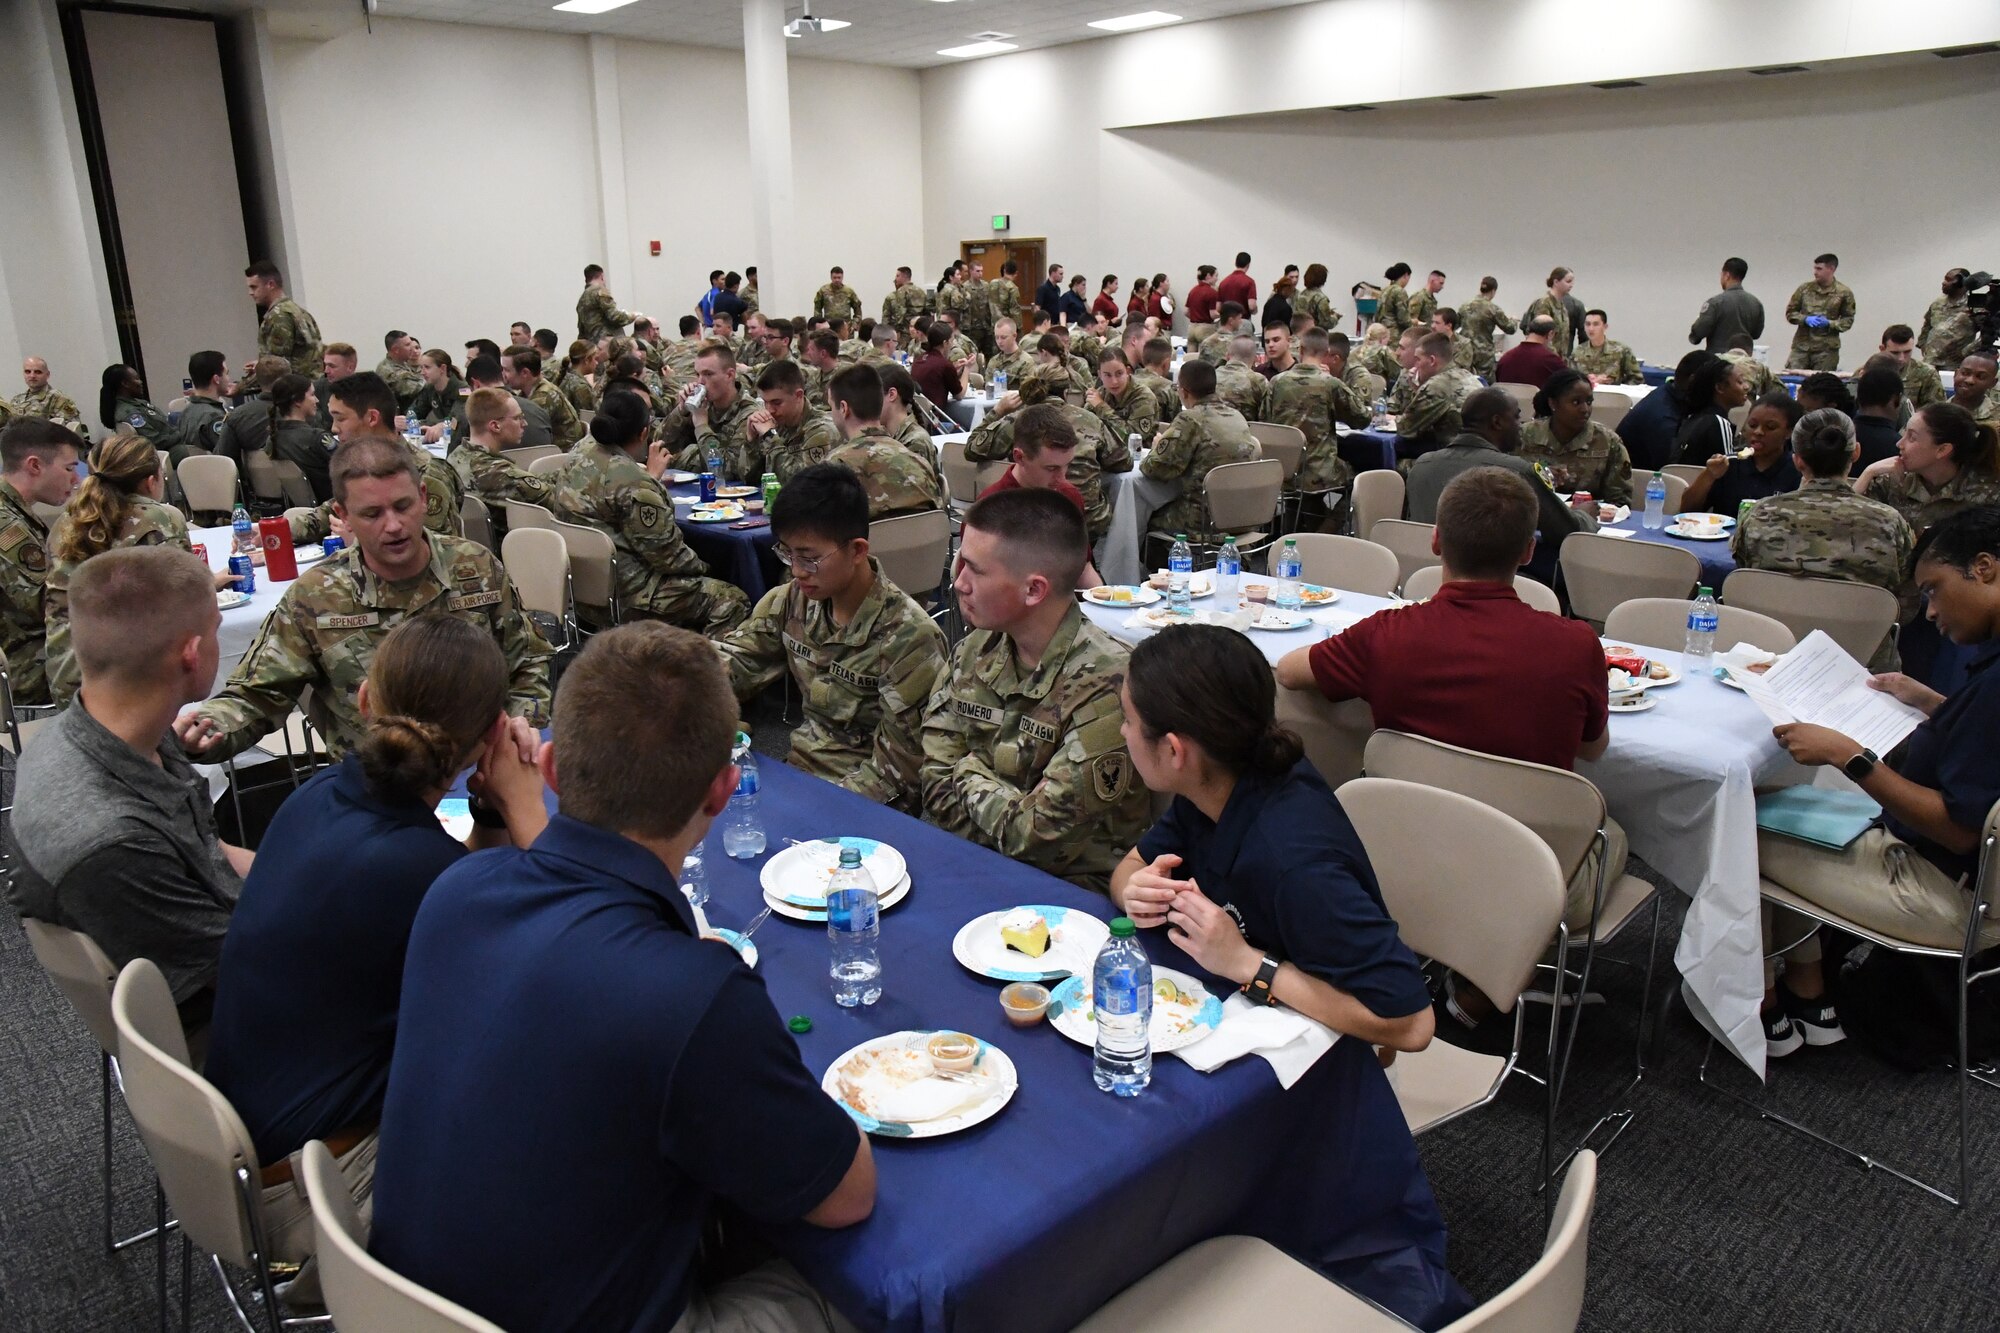 Air Force ROTC cadets participate in a speed mentoring session during Pathways to Blue inside the Roberts Consolidated Aircraft Maintenance Facility at Keesler Air Force Base, Mississippi, March 31, 2023.